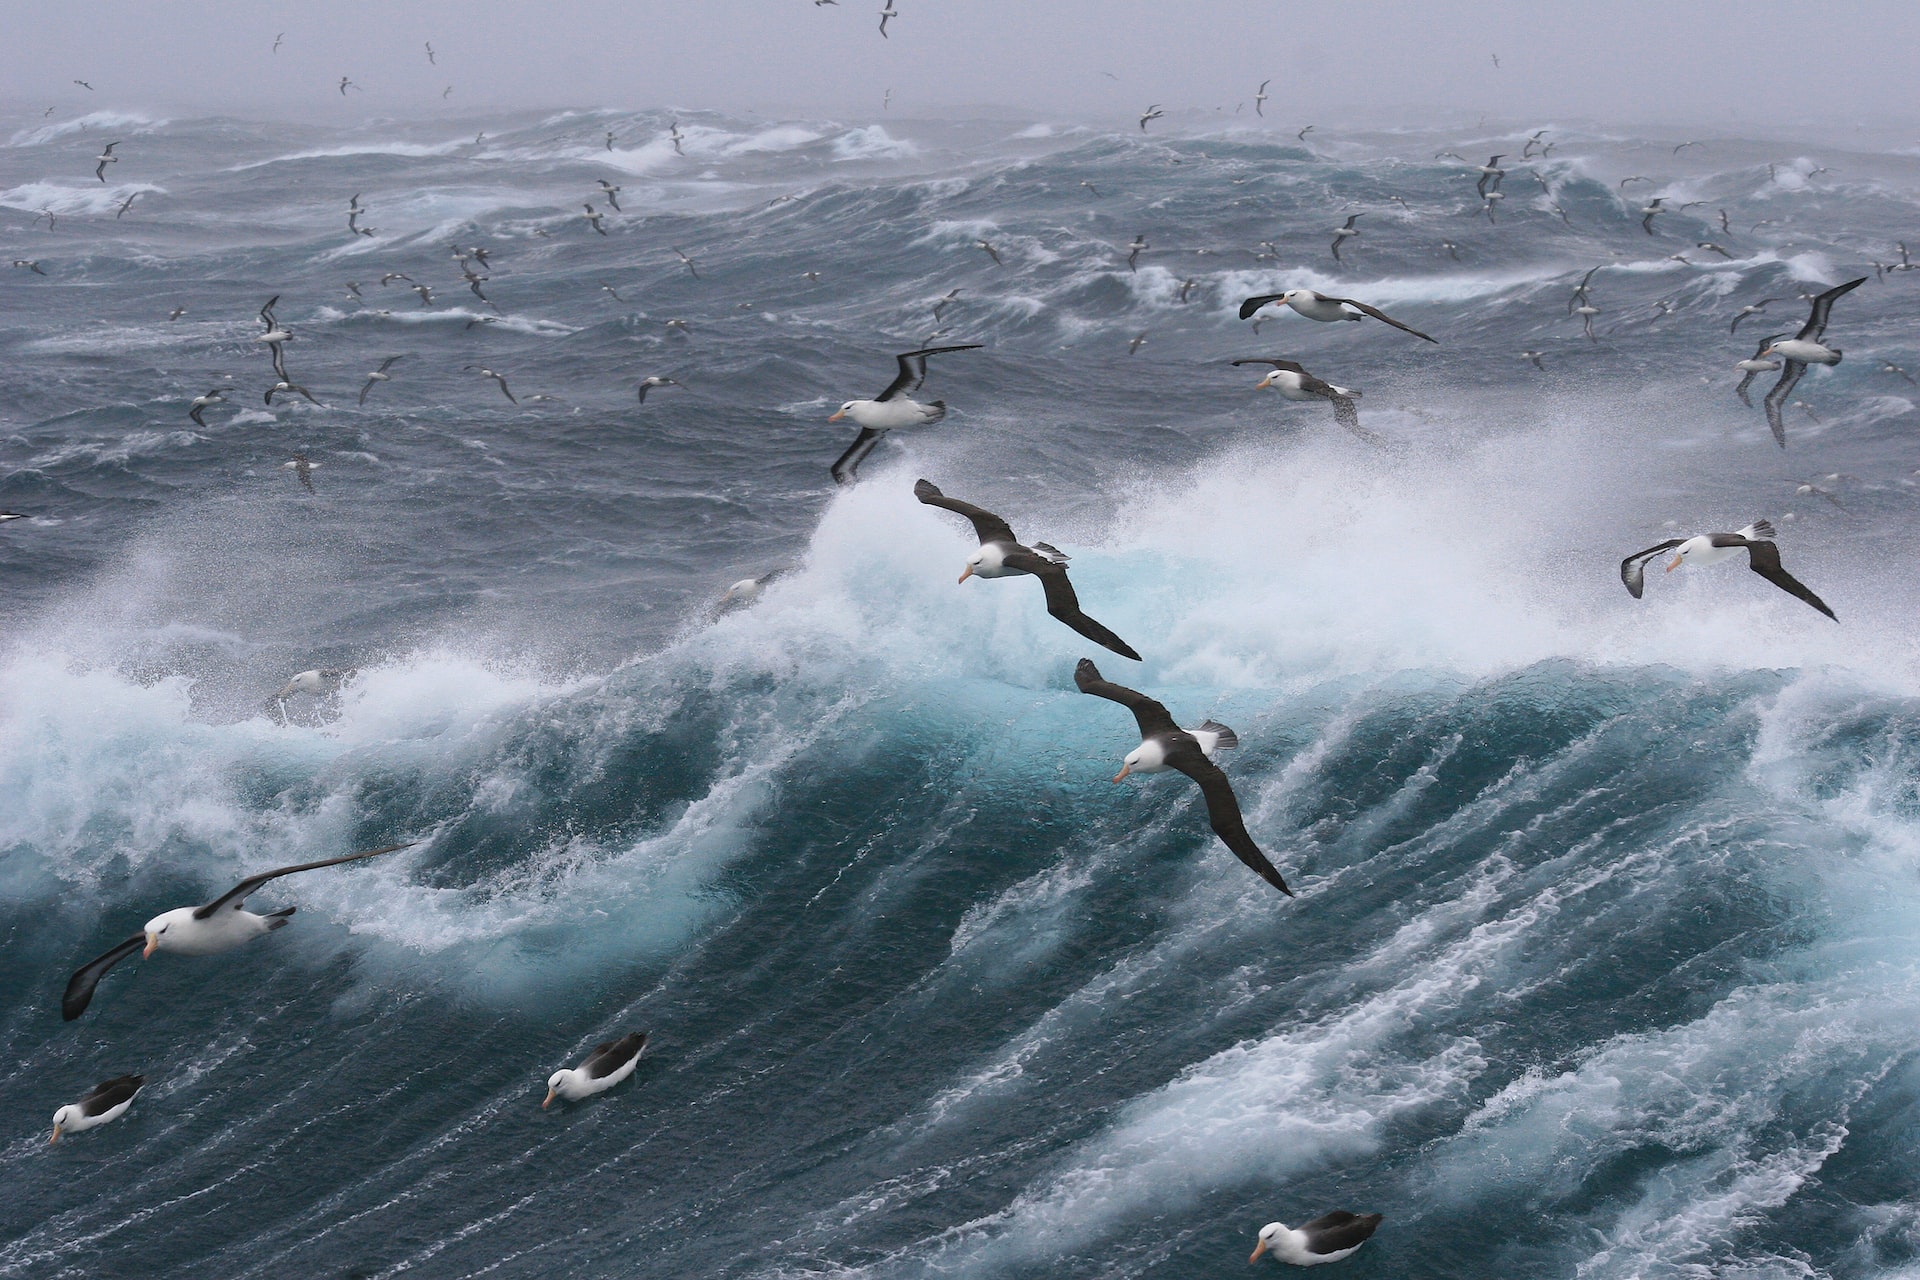 Flying Into Typhoons Helps Some Seabirds Survive The Storm